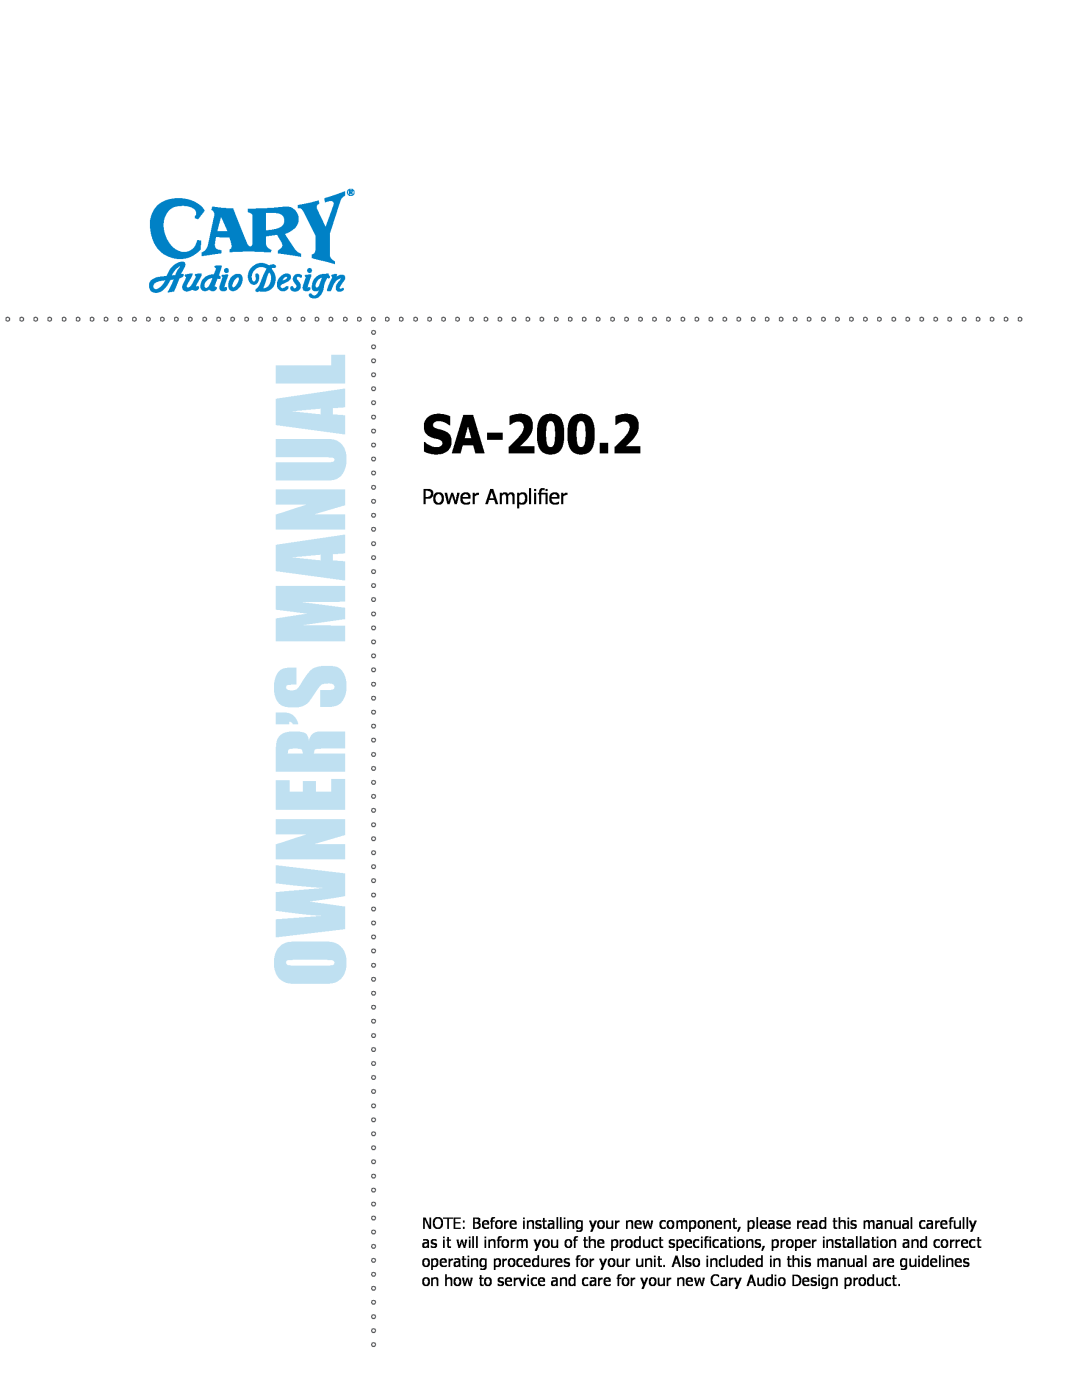 Cary Audio Design SA-200.2 owner manual Power Amplifier 